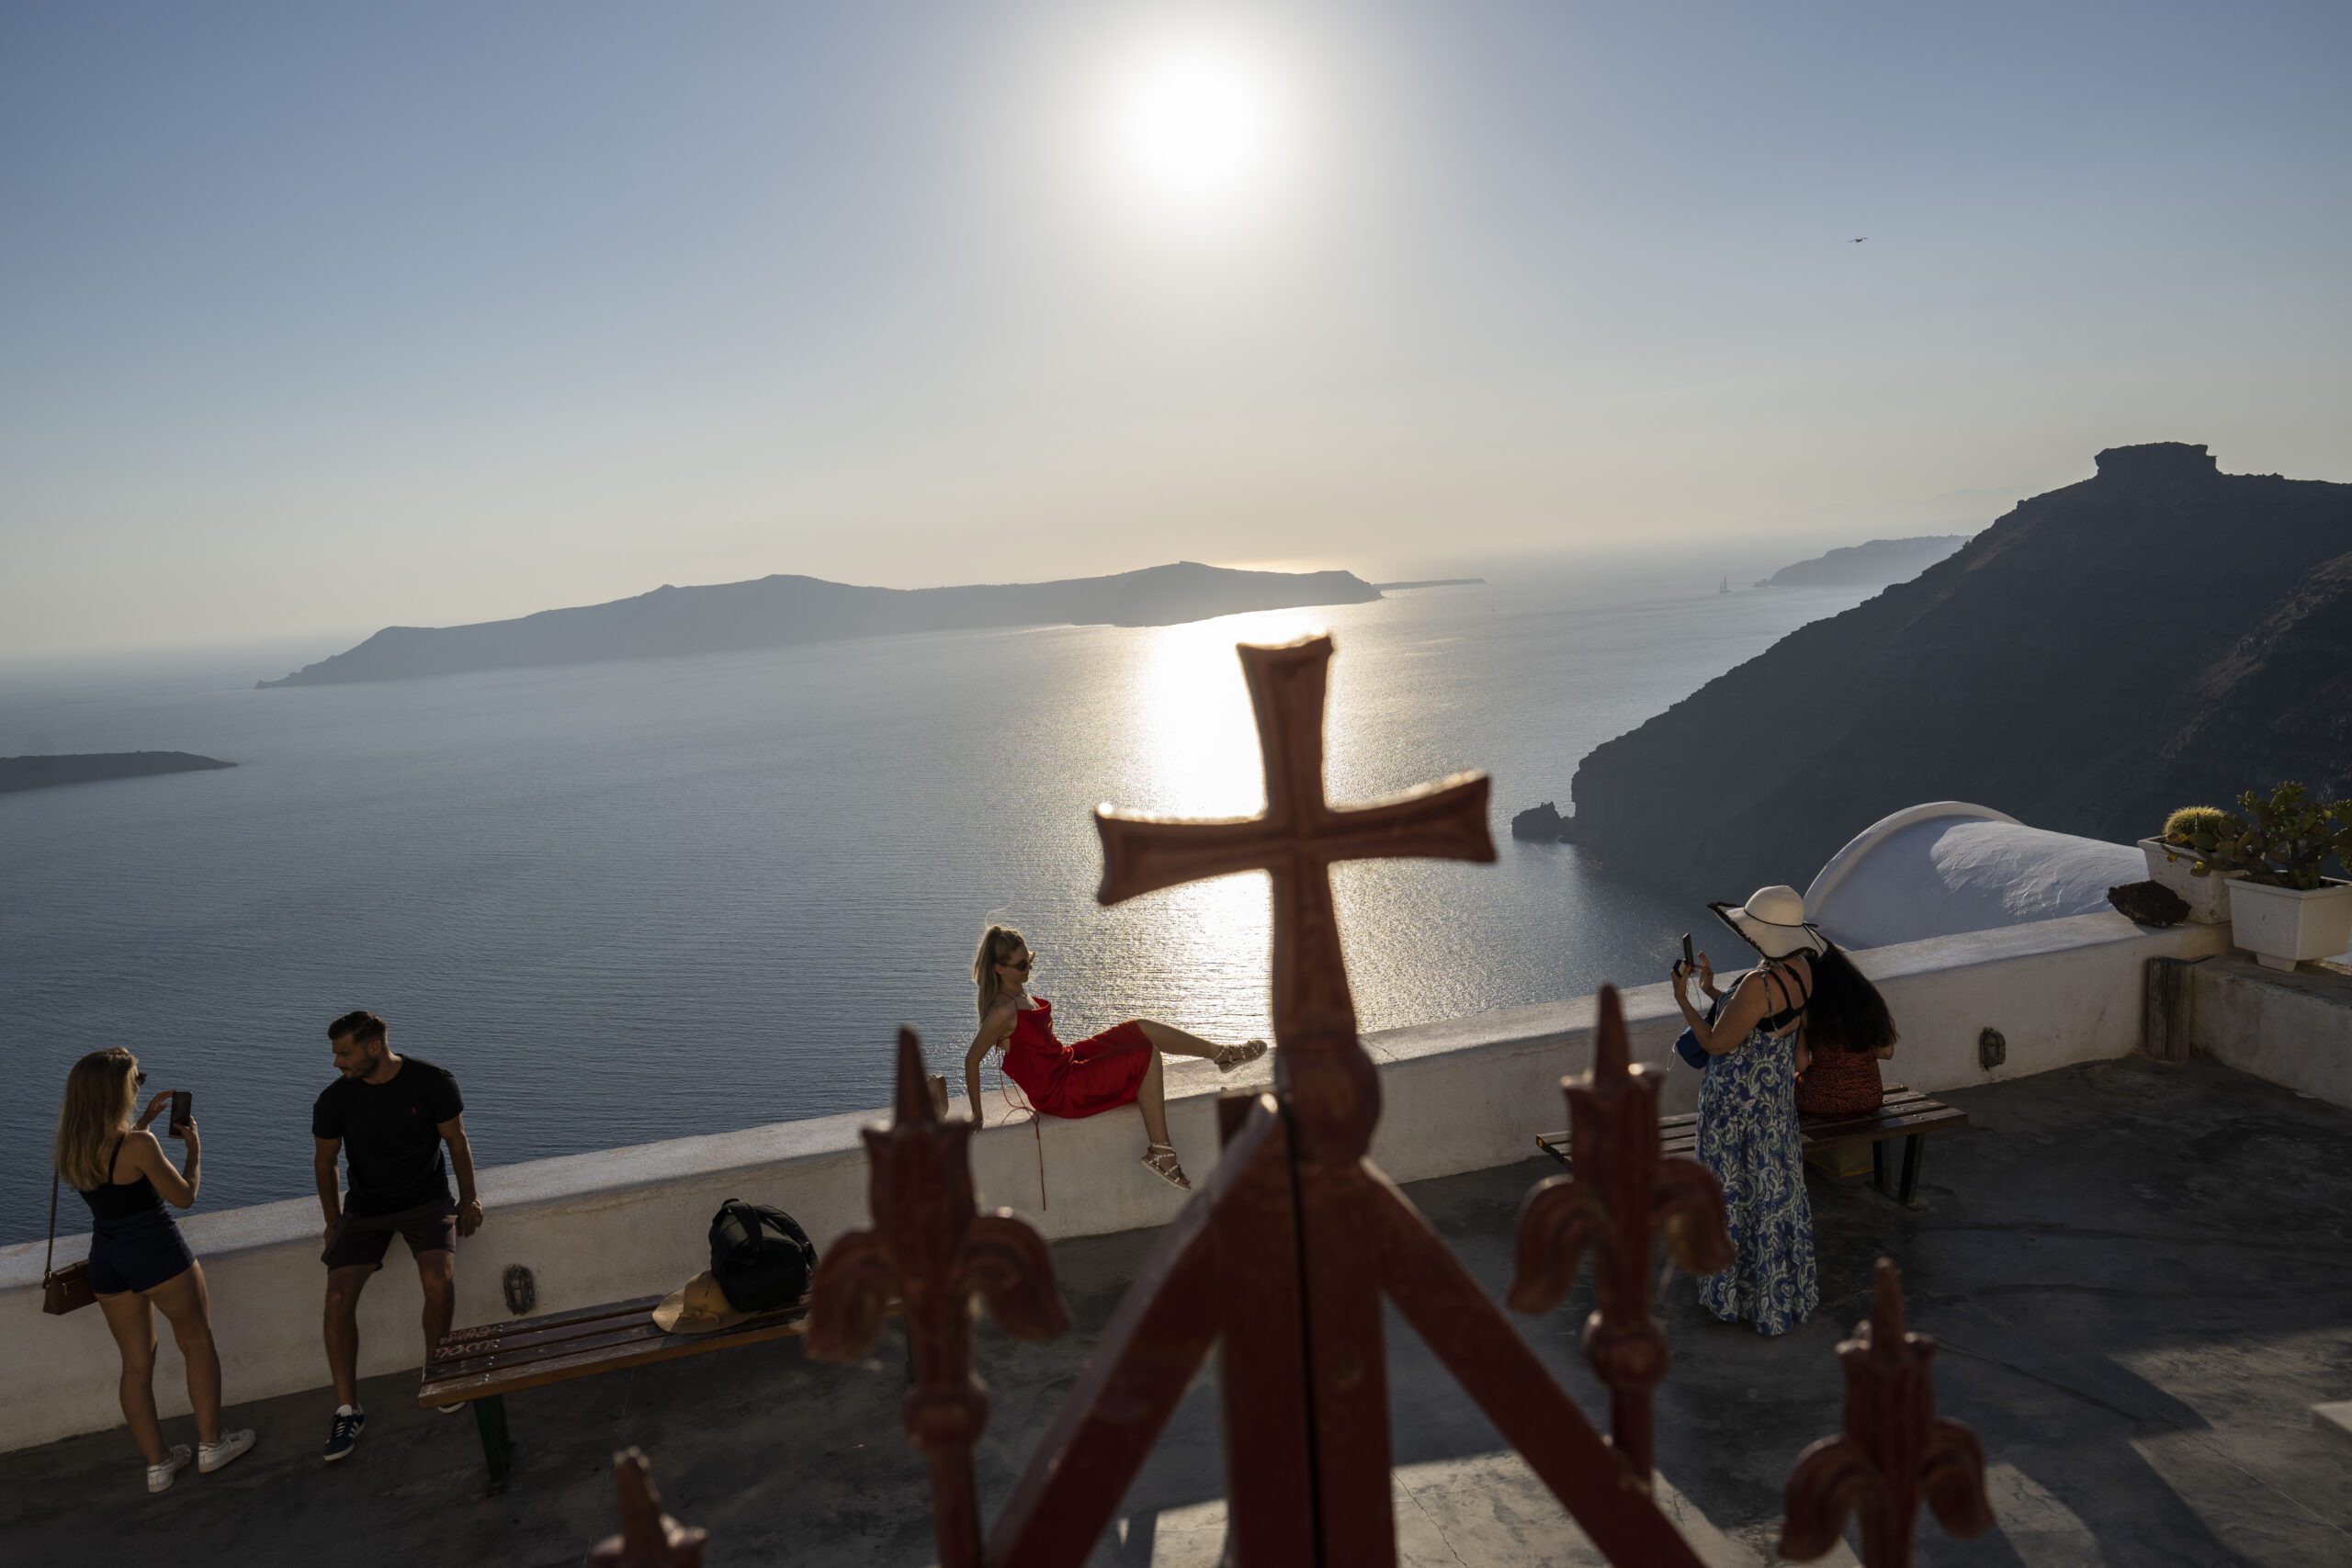 A woman poses for a photograph outside the wrought-iron enclosure of the Dormition of the Virgin Mary Catholic Church on the Greek island of Santorini on Wednesday, June 15, 2022. The Monastery of St. Catherine is home to more than a dozen nuns who devote themselves to tireless prayer. (AP Photo/Petros Giannakouris)